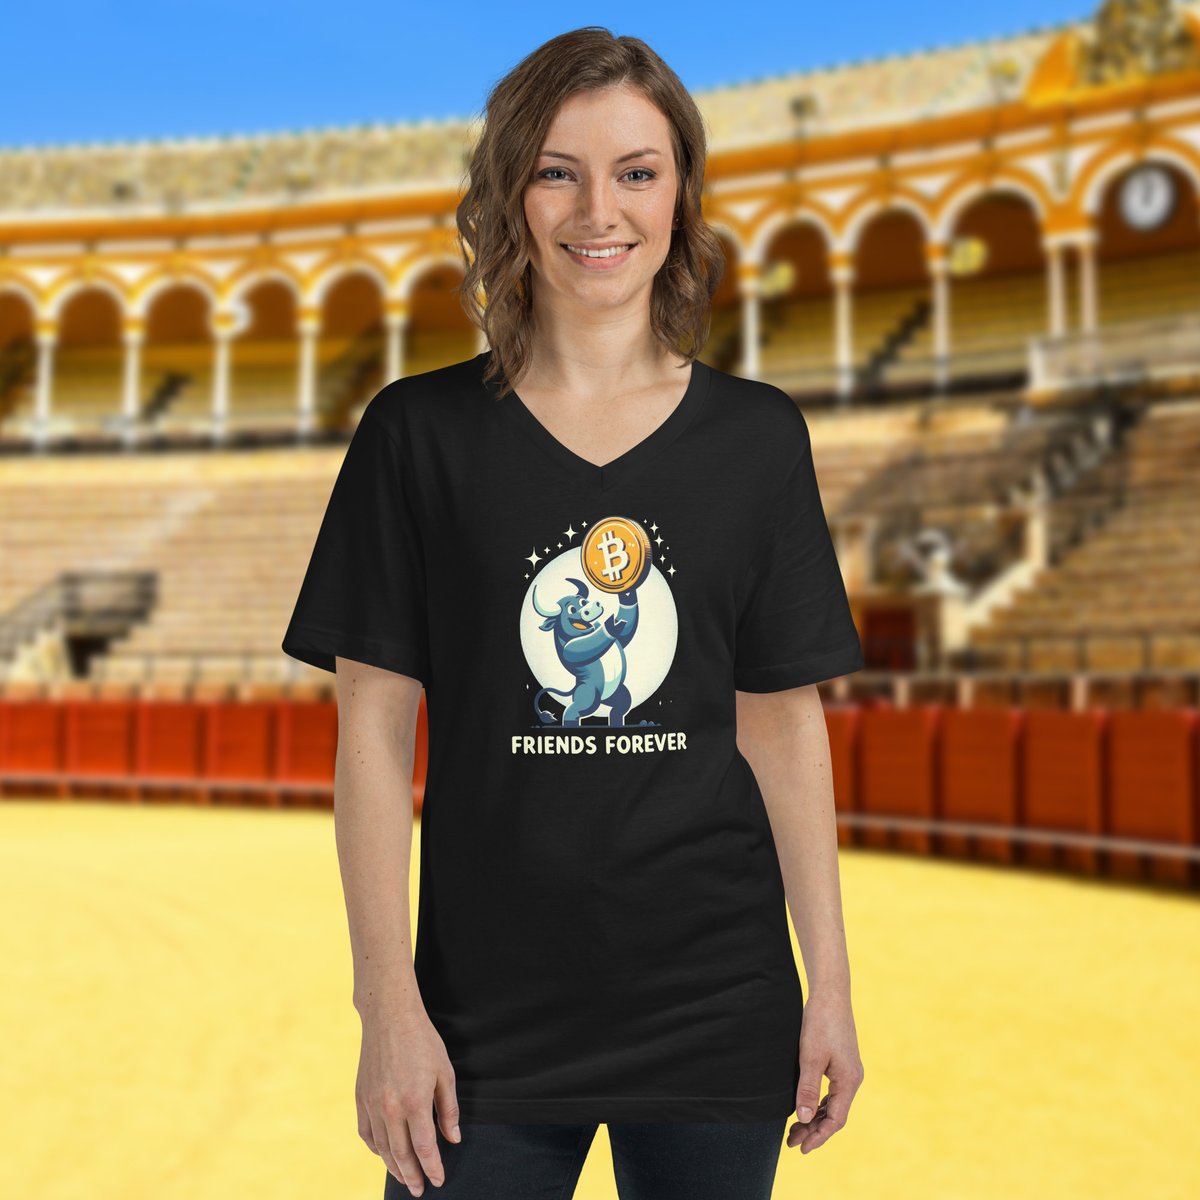 Take charge of your style and your investments with our 'Bull Friend' T-Shirts for women! 🐂📈👚 

bitcoinagora.shop/collections/bu…

#bitcoinagora #cryptotrading #apparel #fashionclothing #bitcoin #satoshi #bullfriend #bullmarket #cryptoapparel #cryptoclothing #cryptofashion #womenshirt